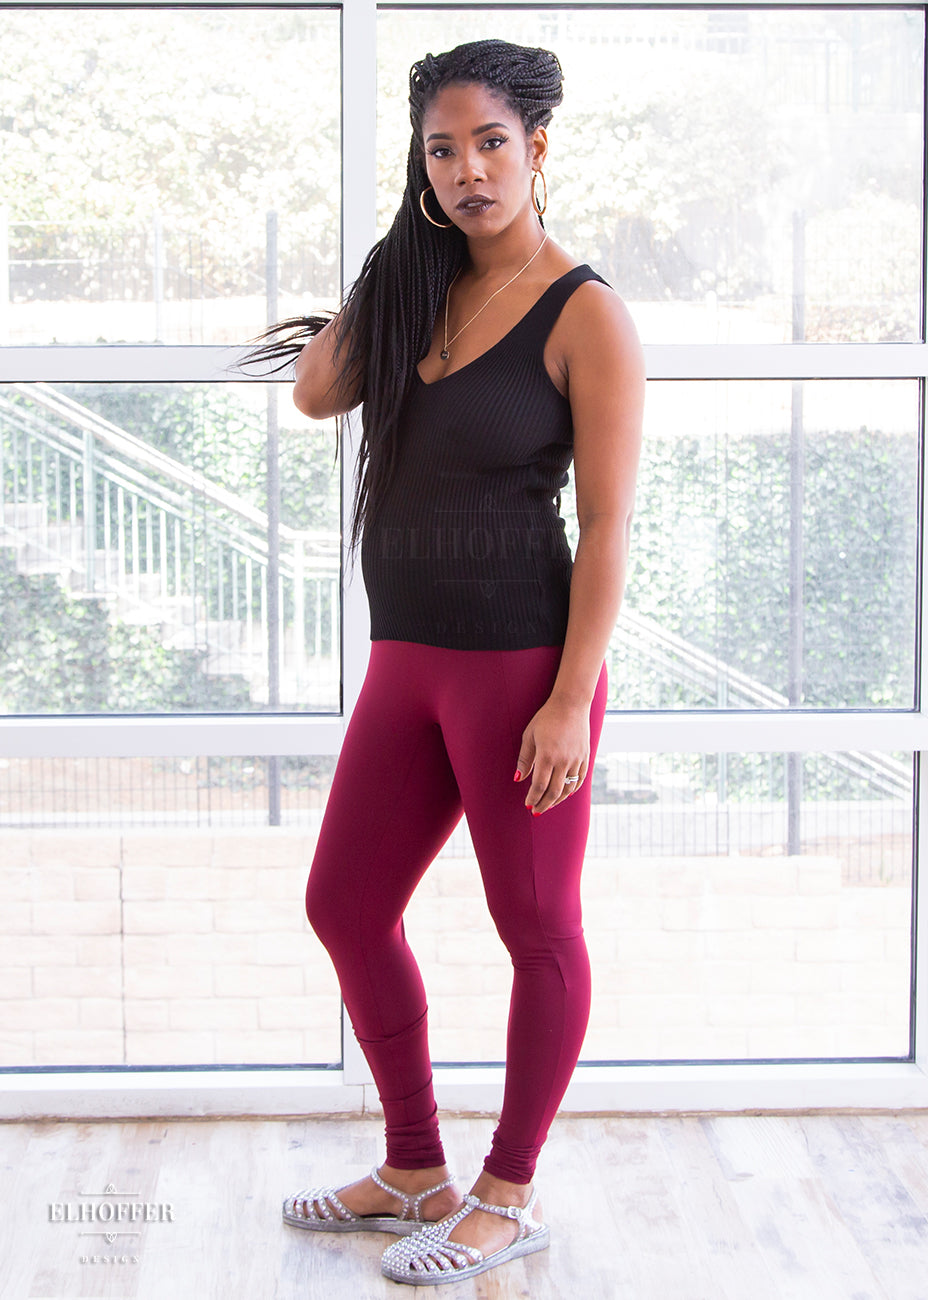 Krystina, a size small medium dark skinned model with long braids, wearing a high-waisted full length fitted legging with side pockets built into the seamwork and a seamless front in a beautiful burgundy color. She has paired them with a black knit Gemini top. 